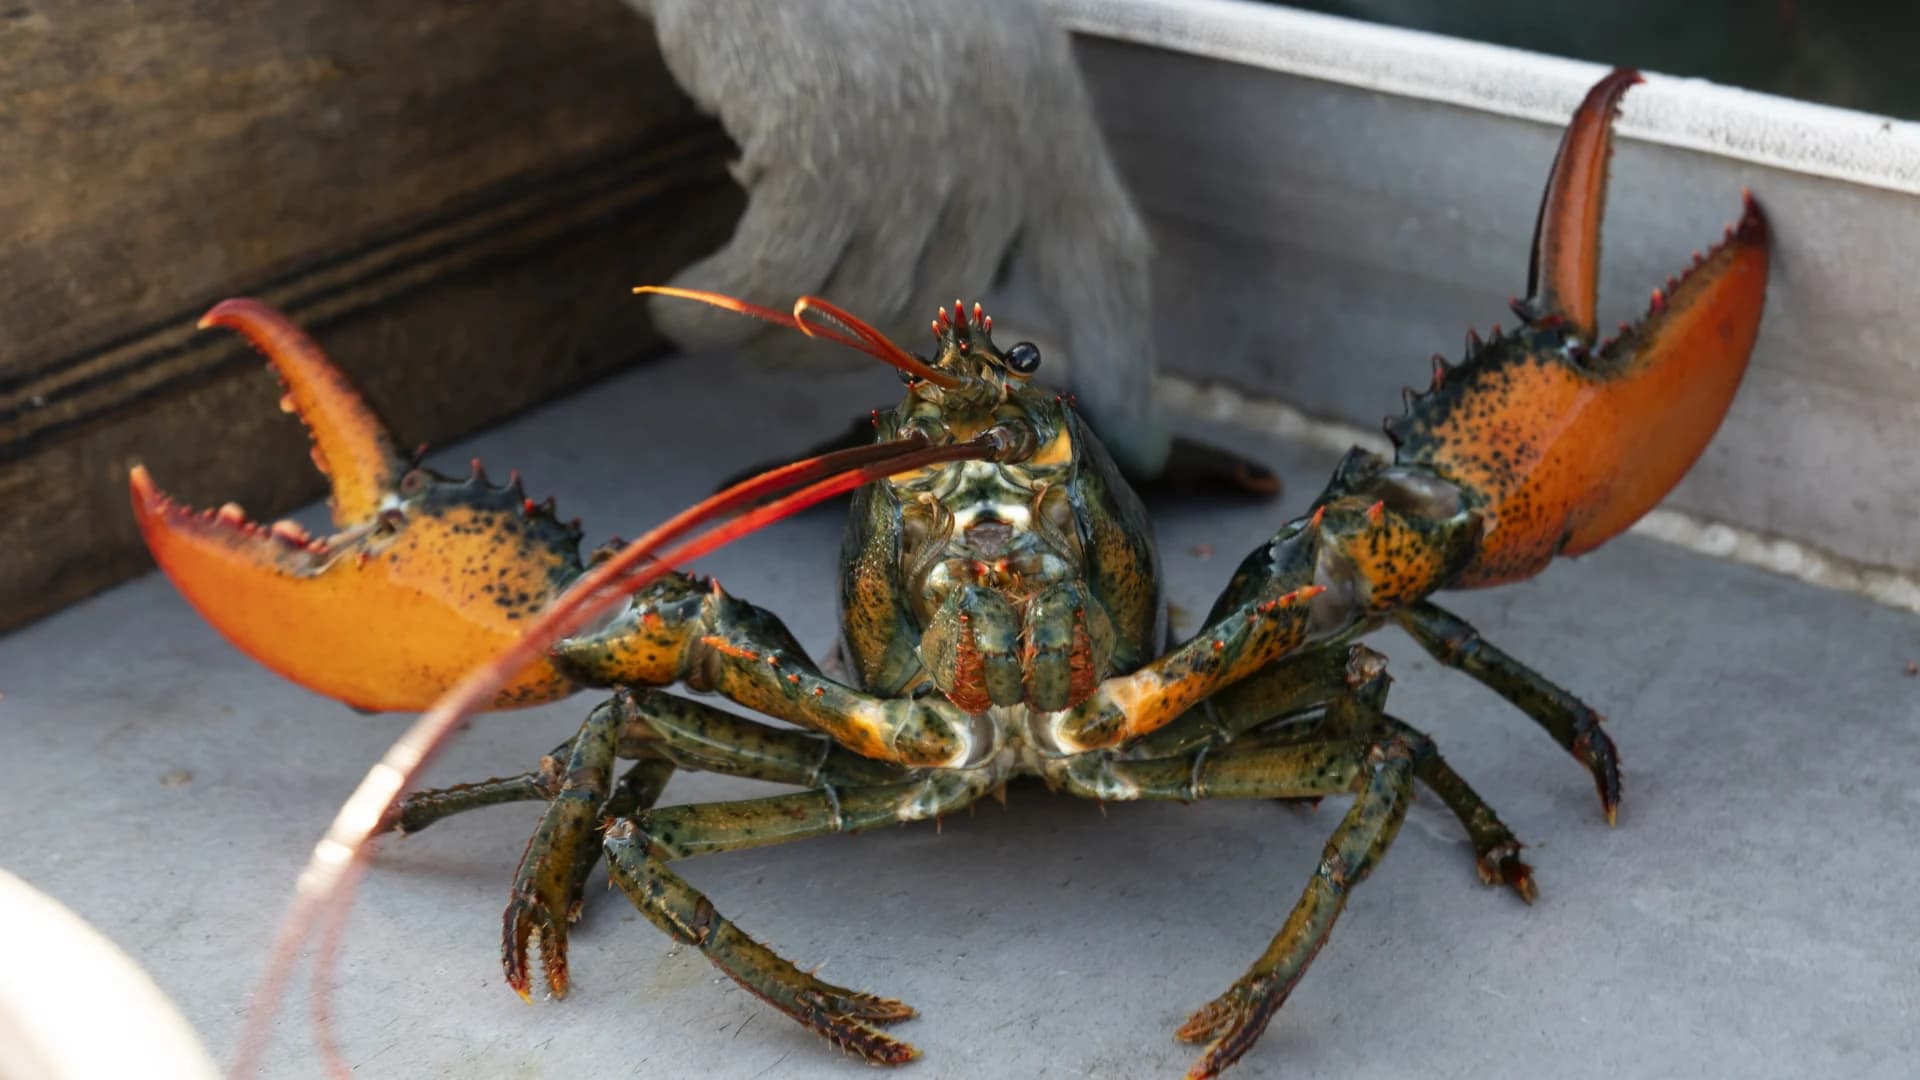 Whole Foods decision to pull lobster divides environmentalists, politicians